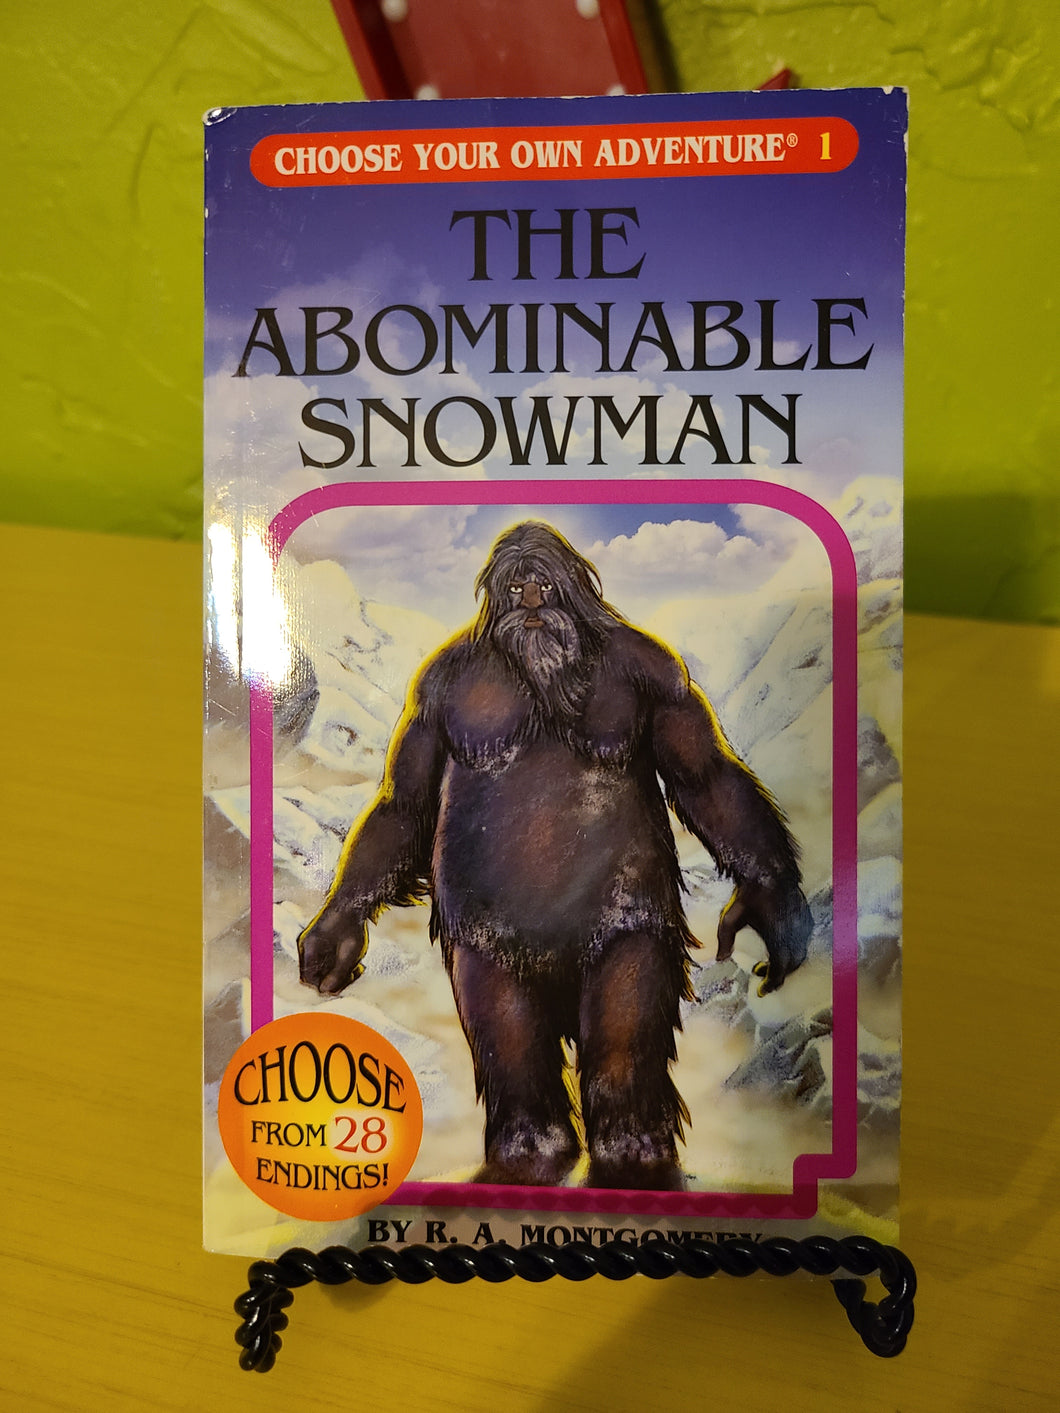 Choose Your Own Adventure #1 The Abominable Snowman